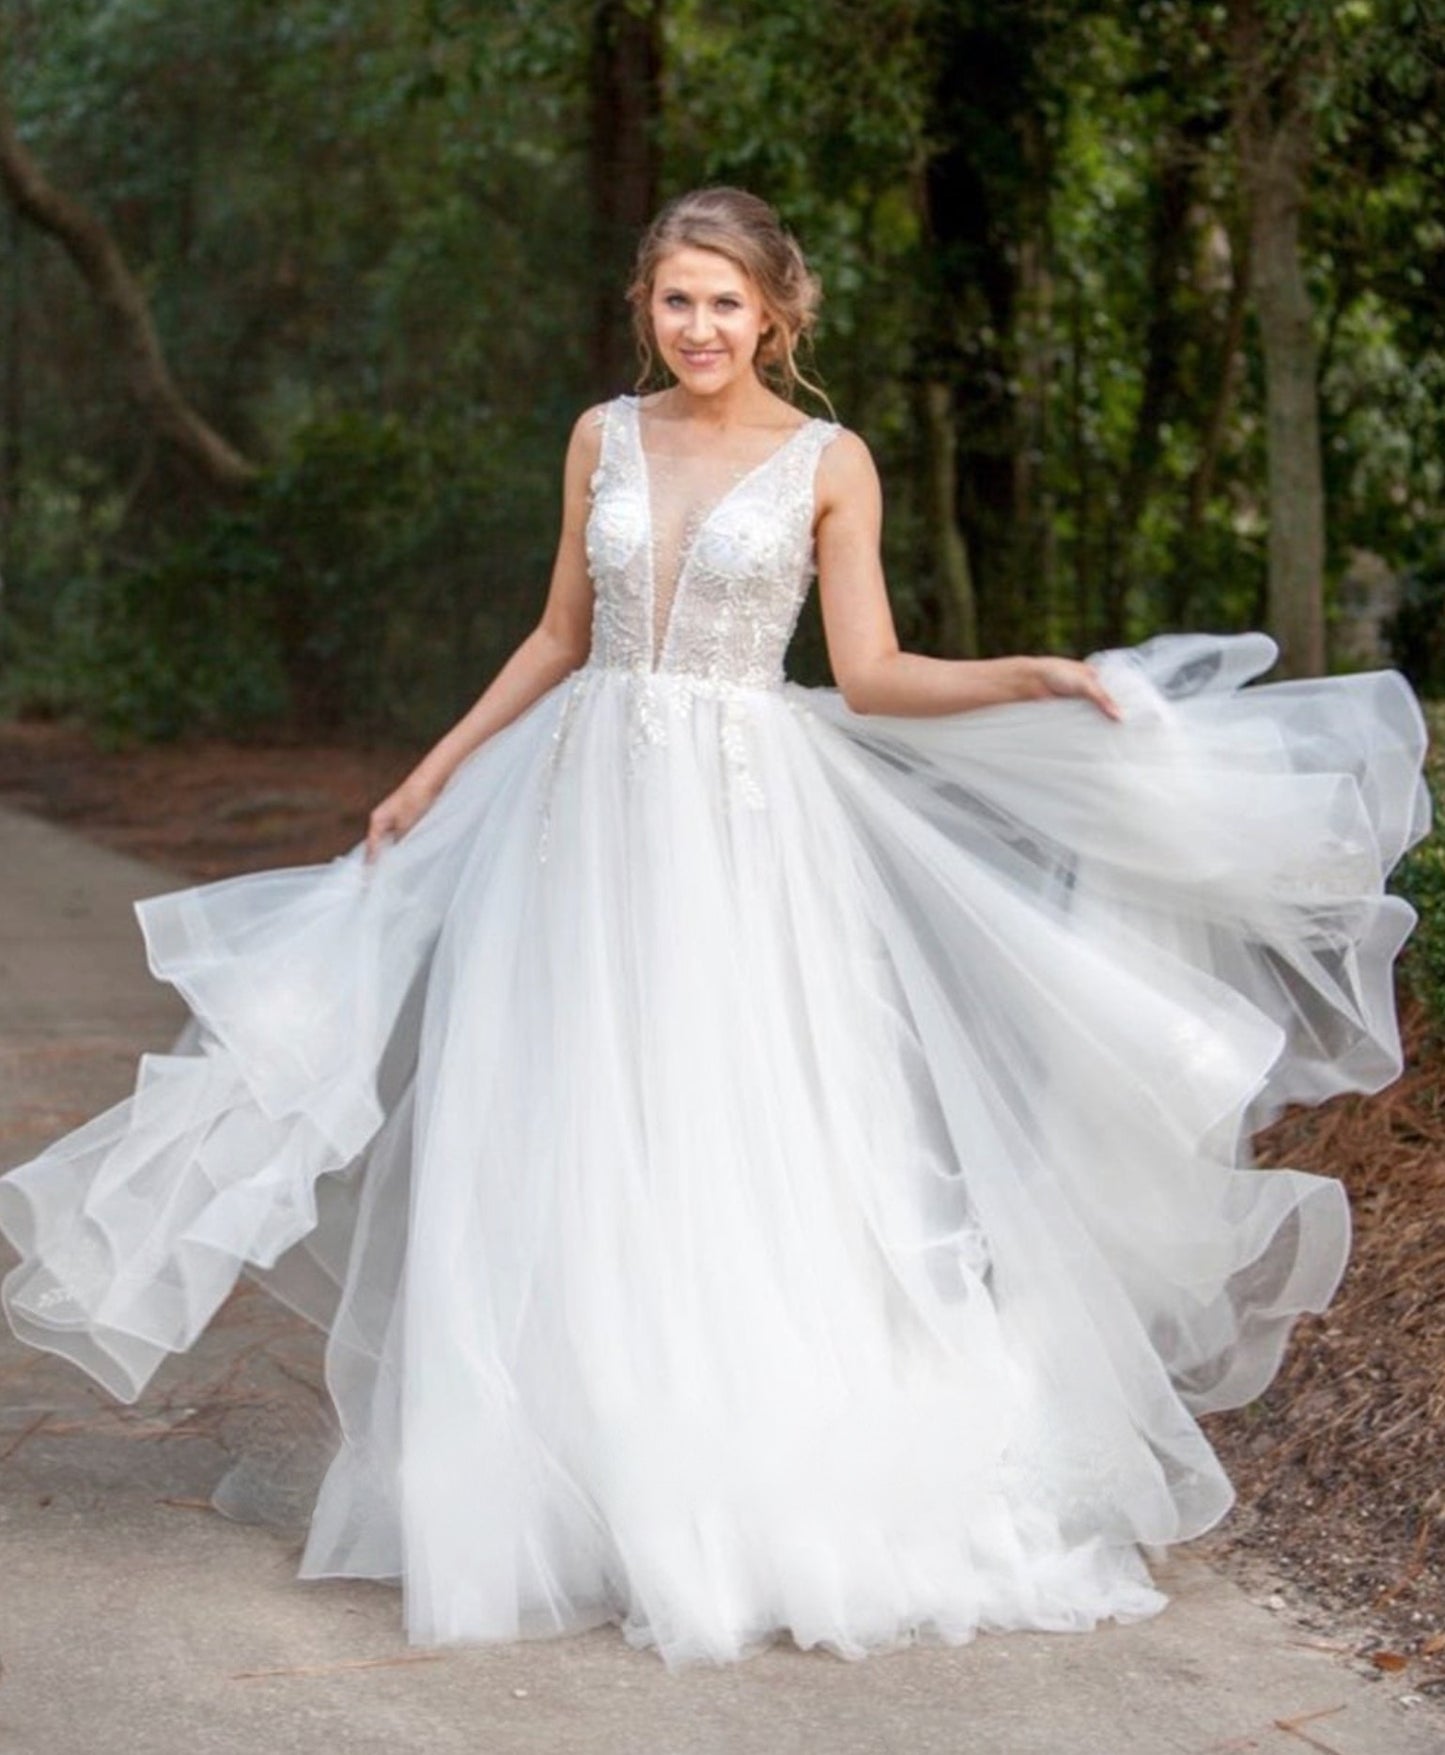 Tulle Wedding Dresses – TulleLux Bridal Crowns & Accessories